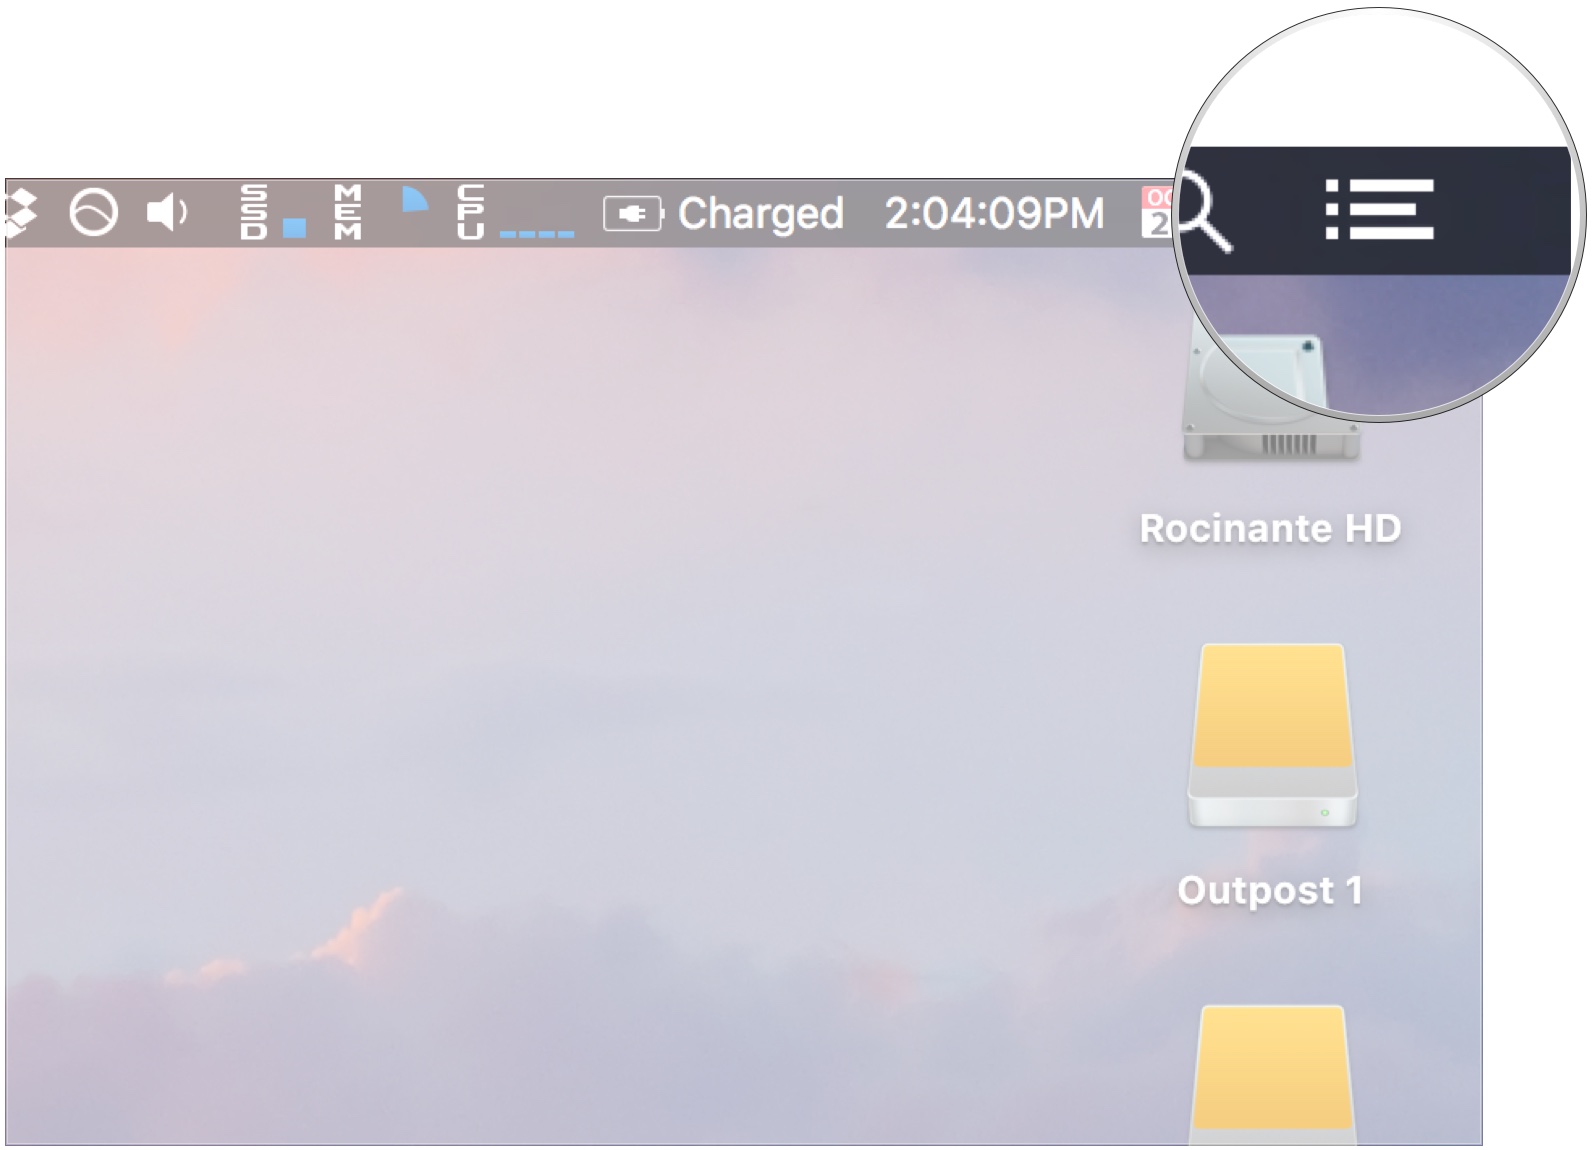 How to set up and use Notification Center on your Mac